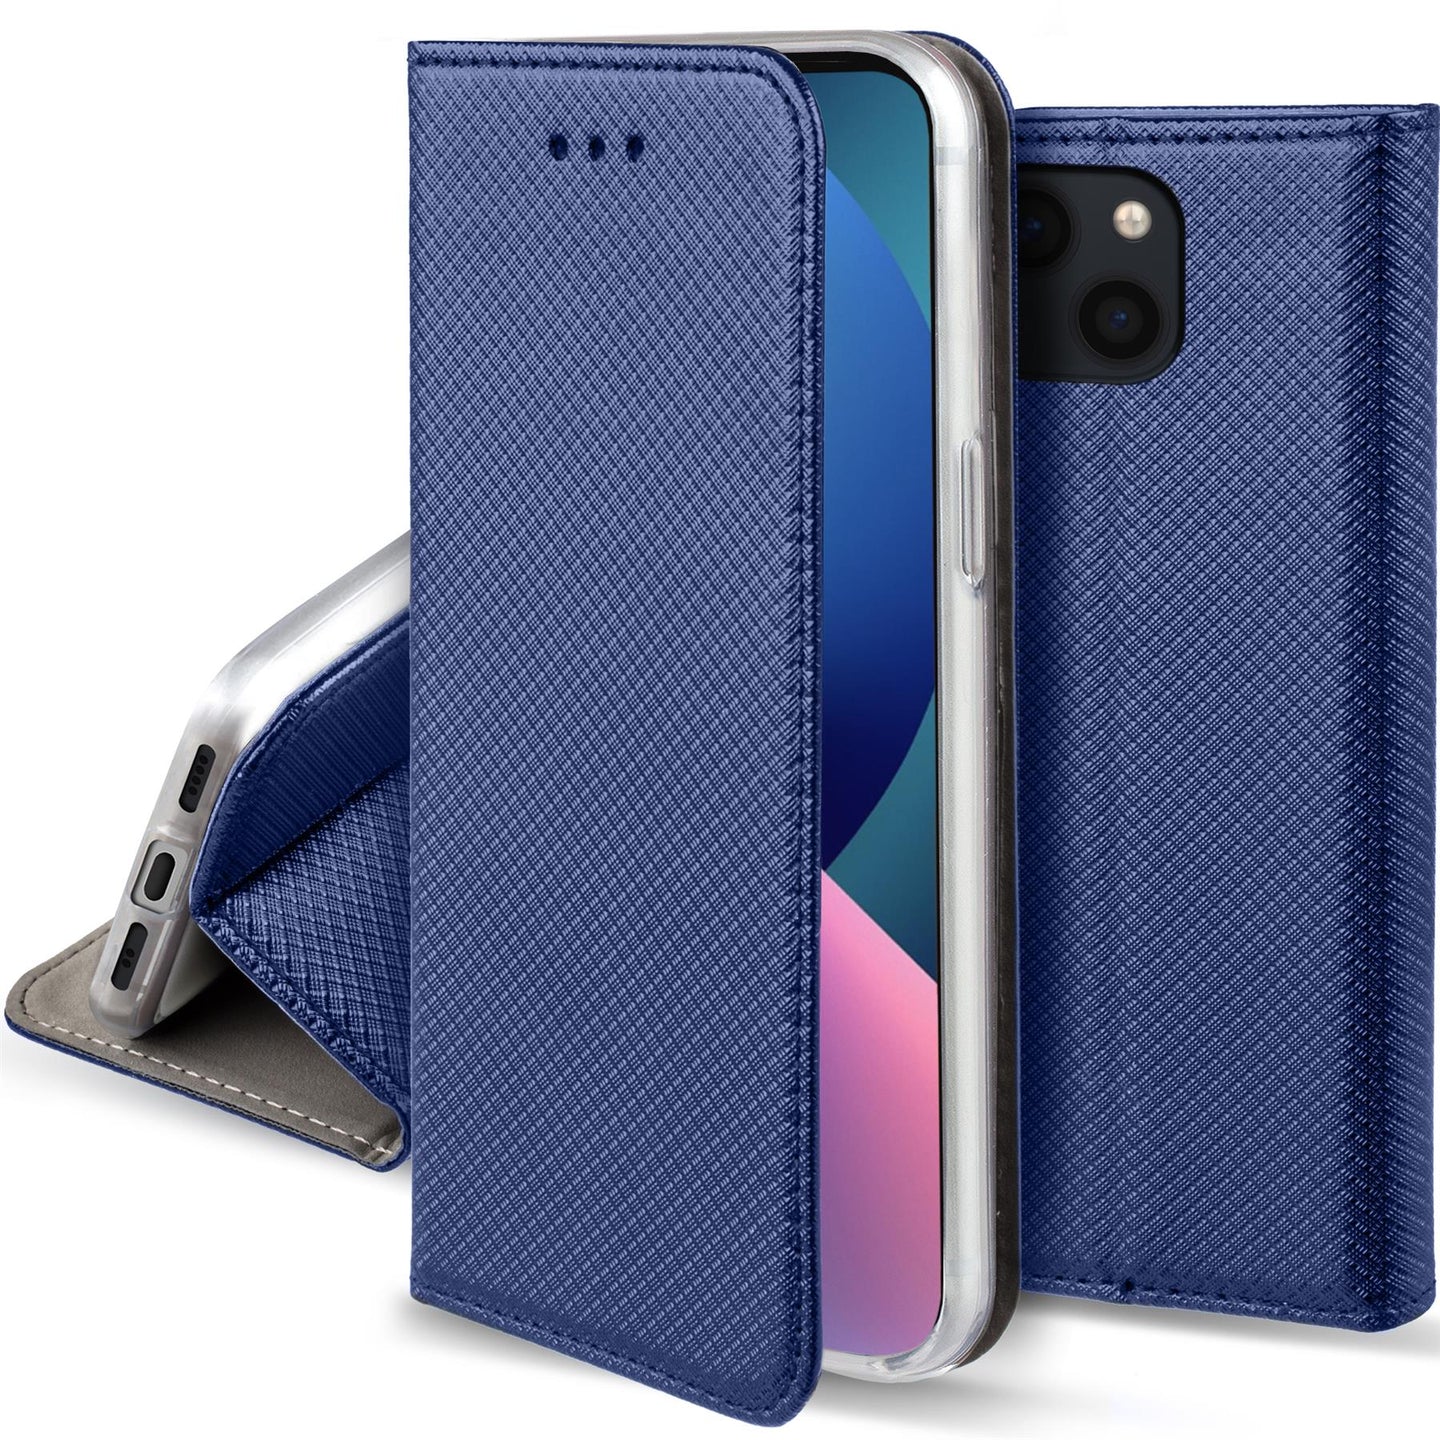 Moozy Case Flip Cover for iPhone 13 Mini, Dark Blue - Smart Magnetic Flip Case Flip Folio Wallet Case with Card Holder and Stand, Credit Card Slots